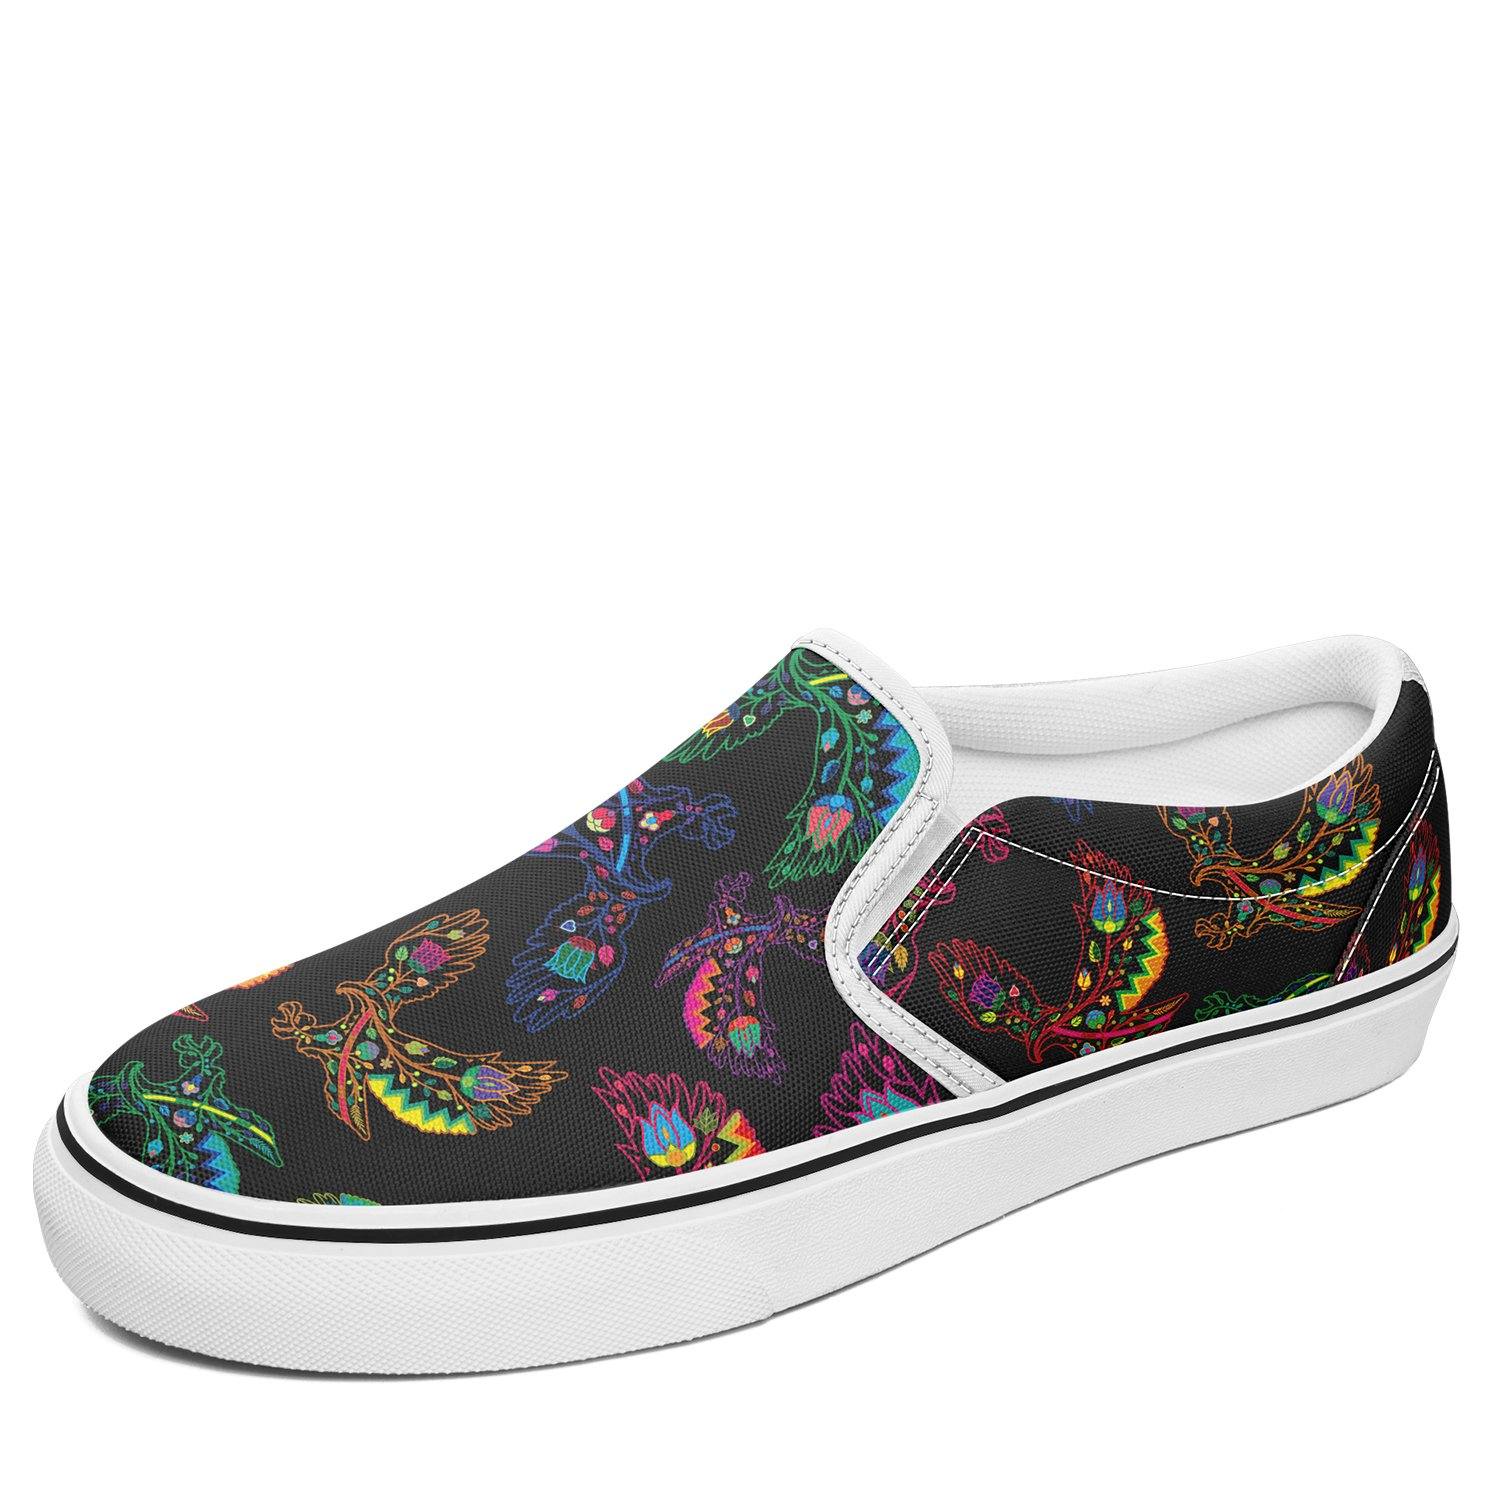 Floral Eagle Otoyimm Canvas Slip On Shoes otoyimm Herman US Youth 1 / EUR 32 White Sole 